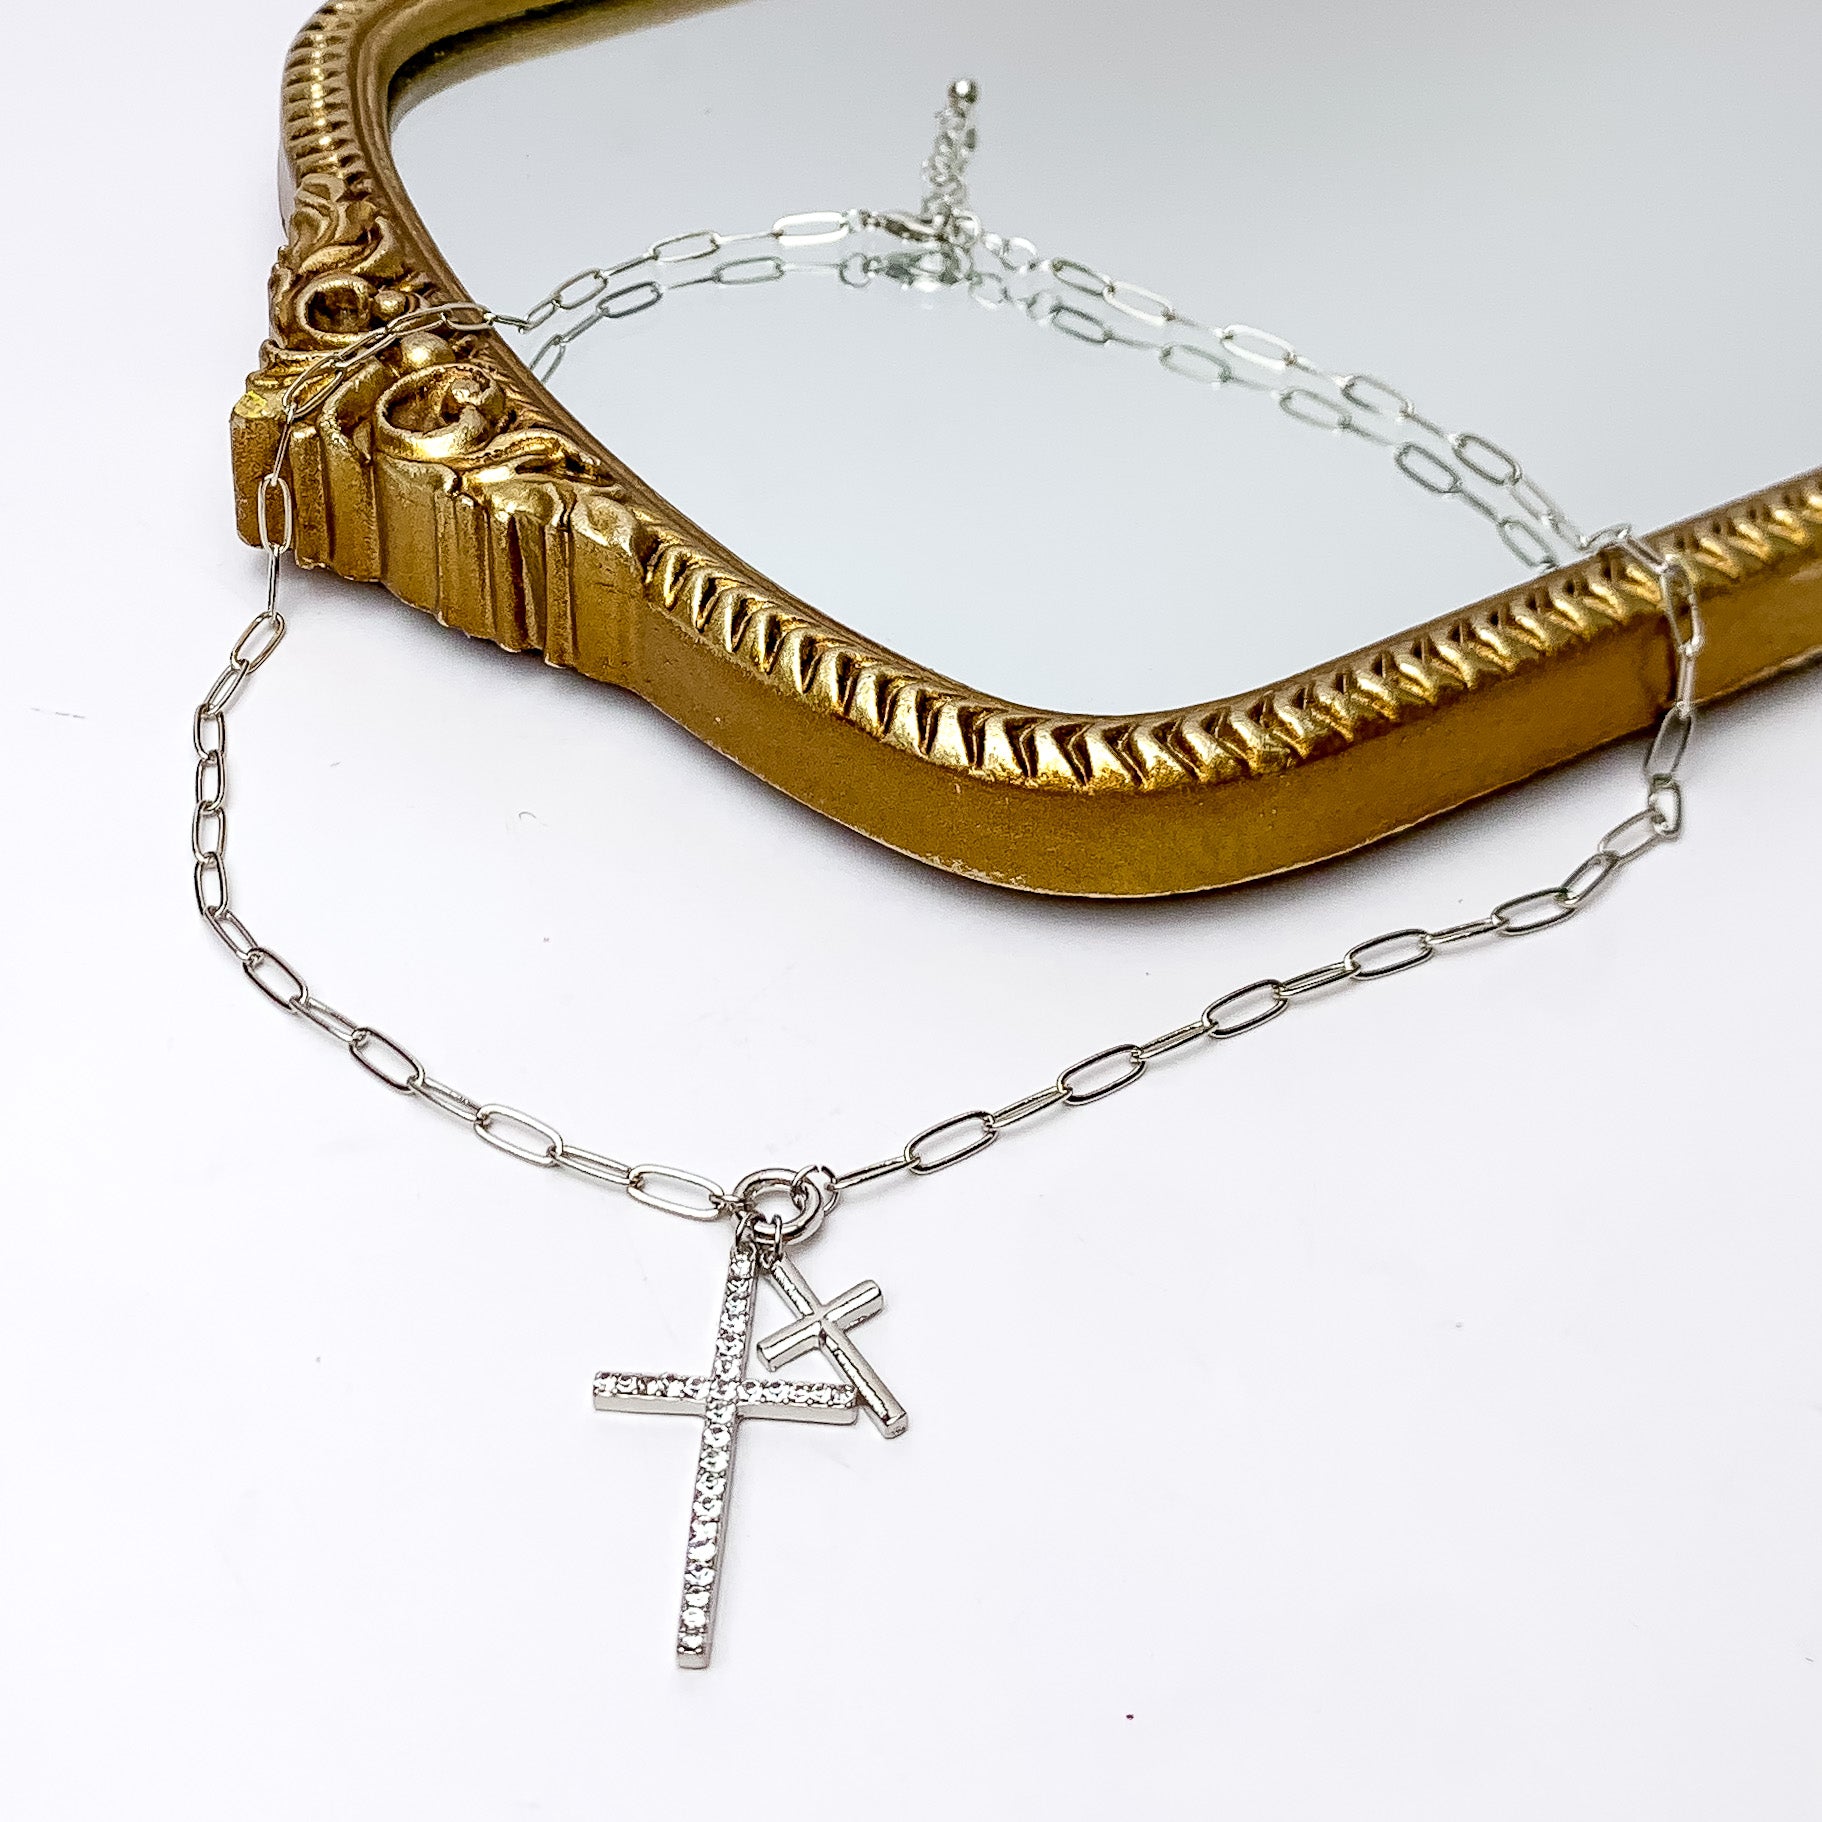 Silver Tone Double Cross Chain Necklace With Clear Crystals. Pictured on a white background with part of the necklace on a gold trimmed necklace.